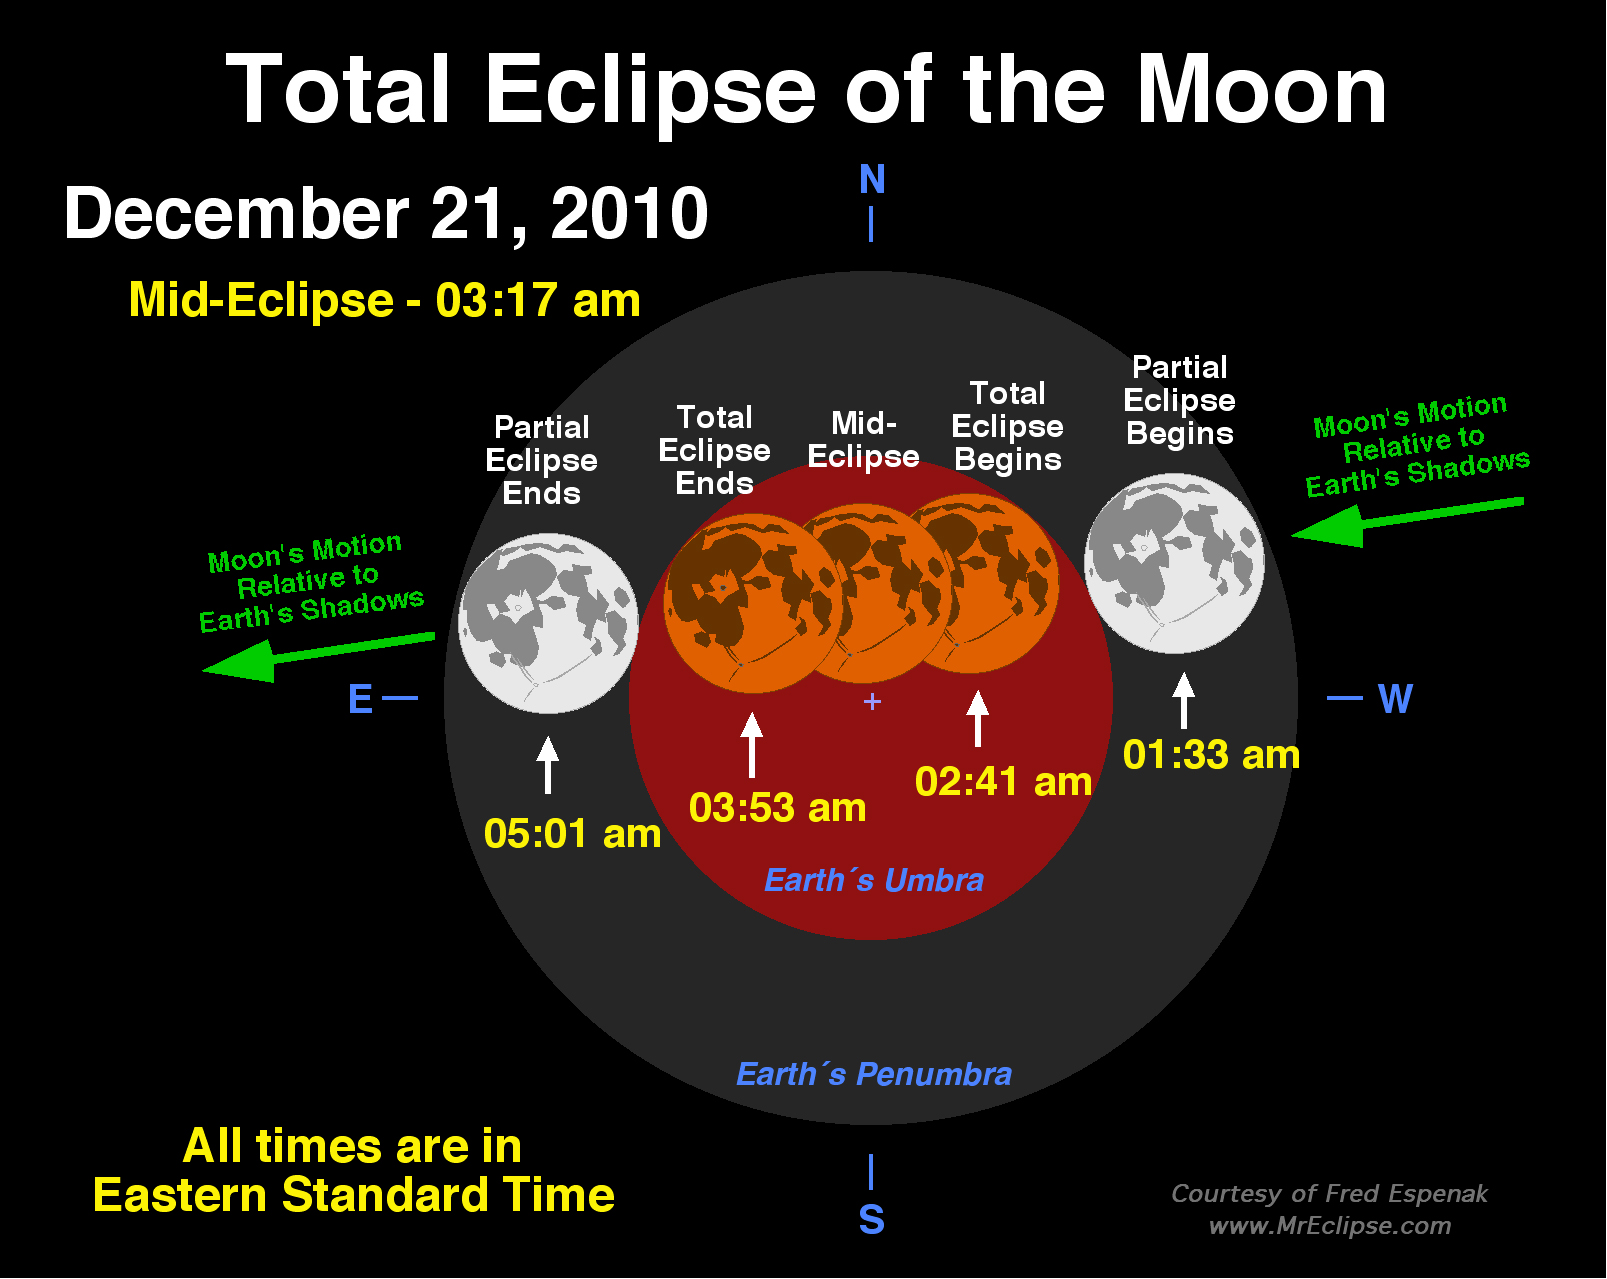 Total Eclipse Map for December 21, 2010 